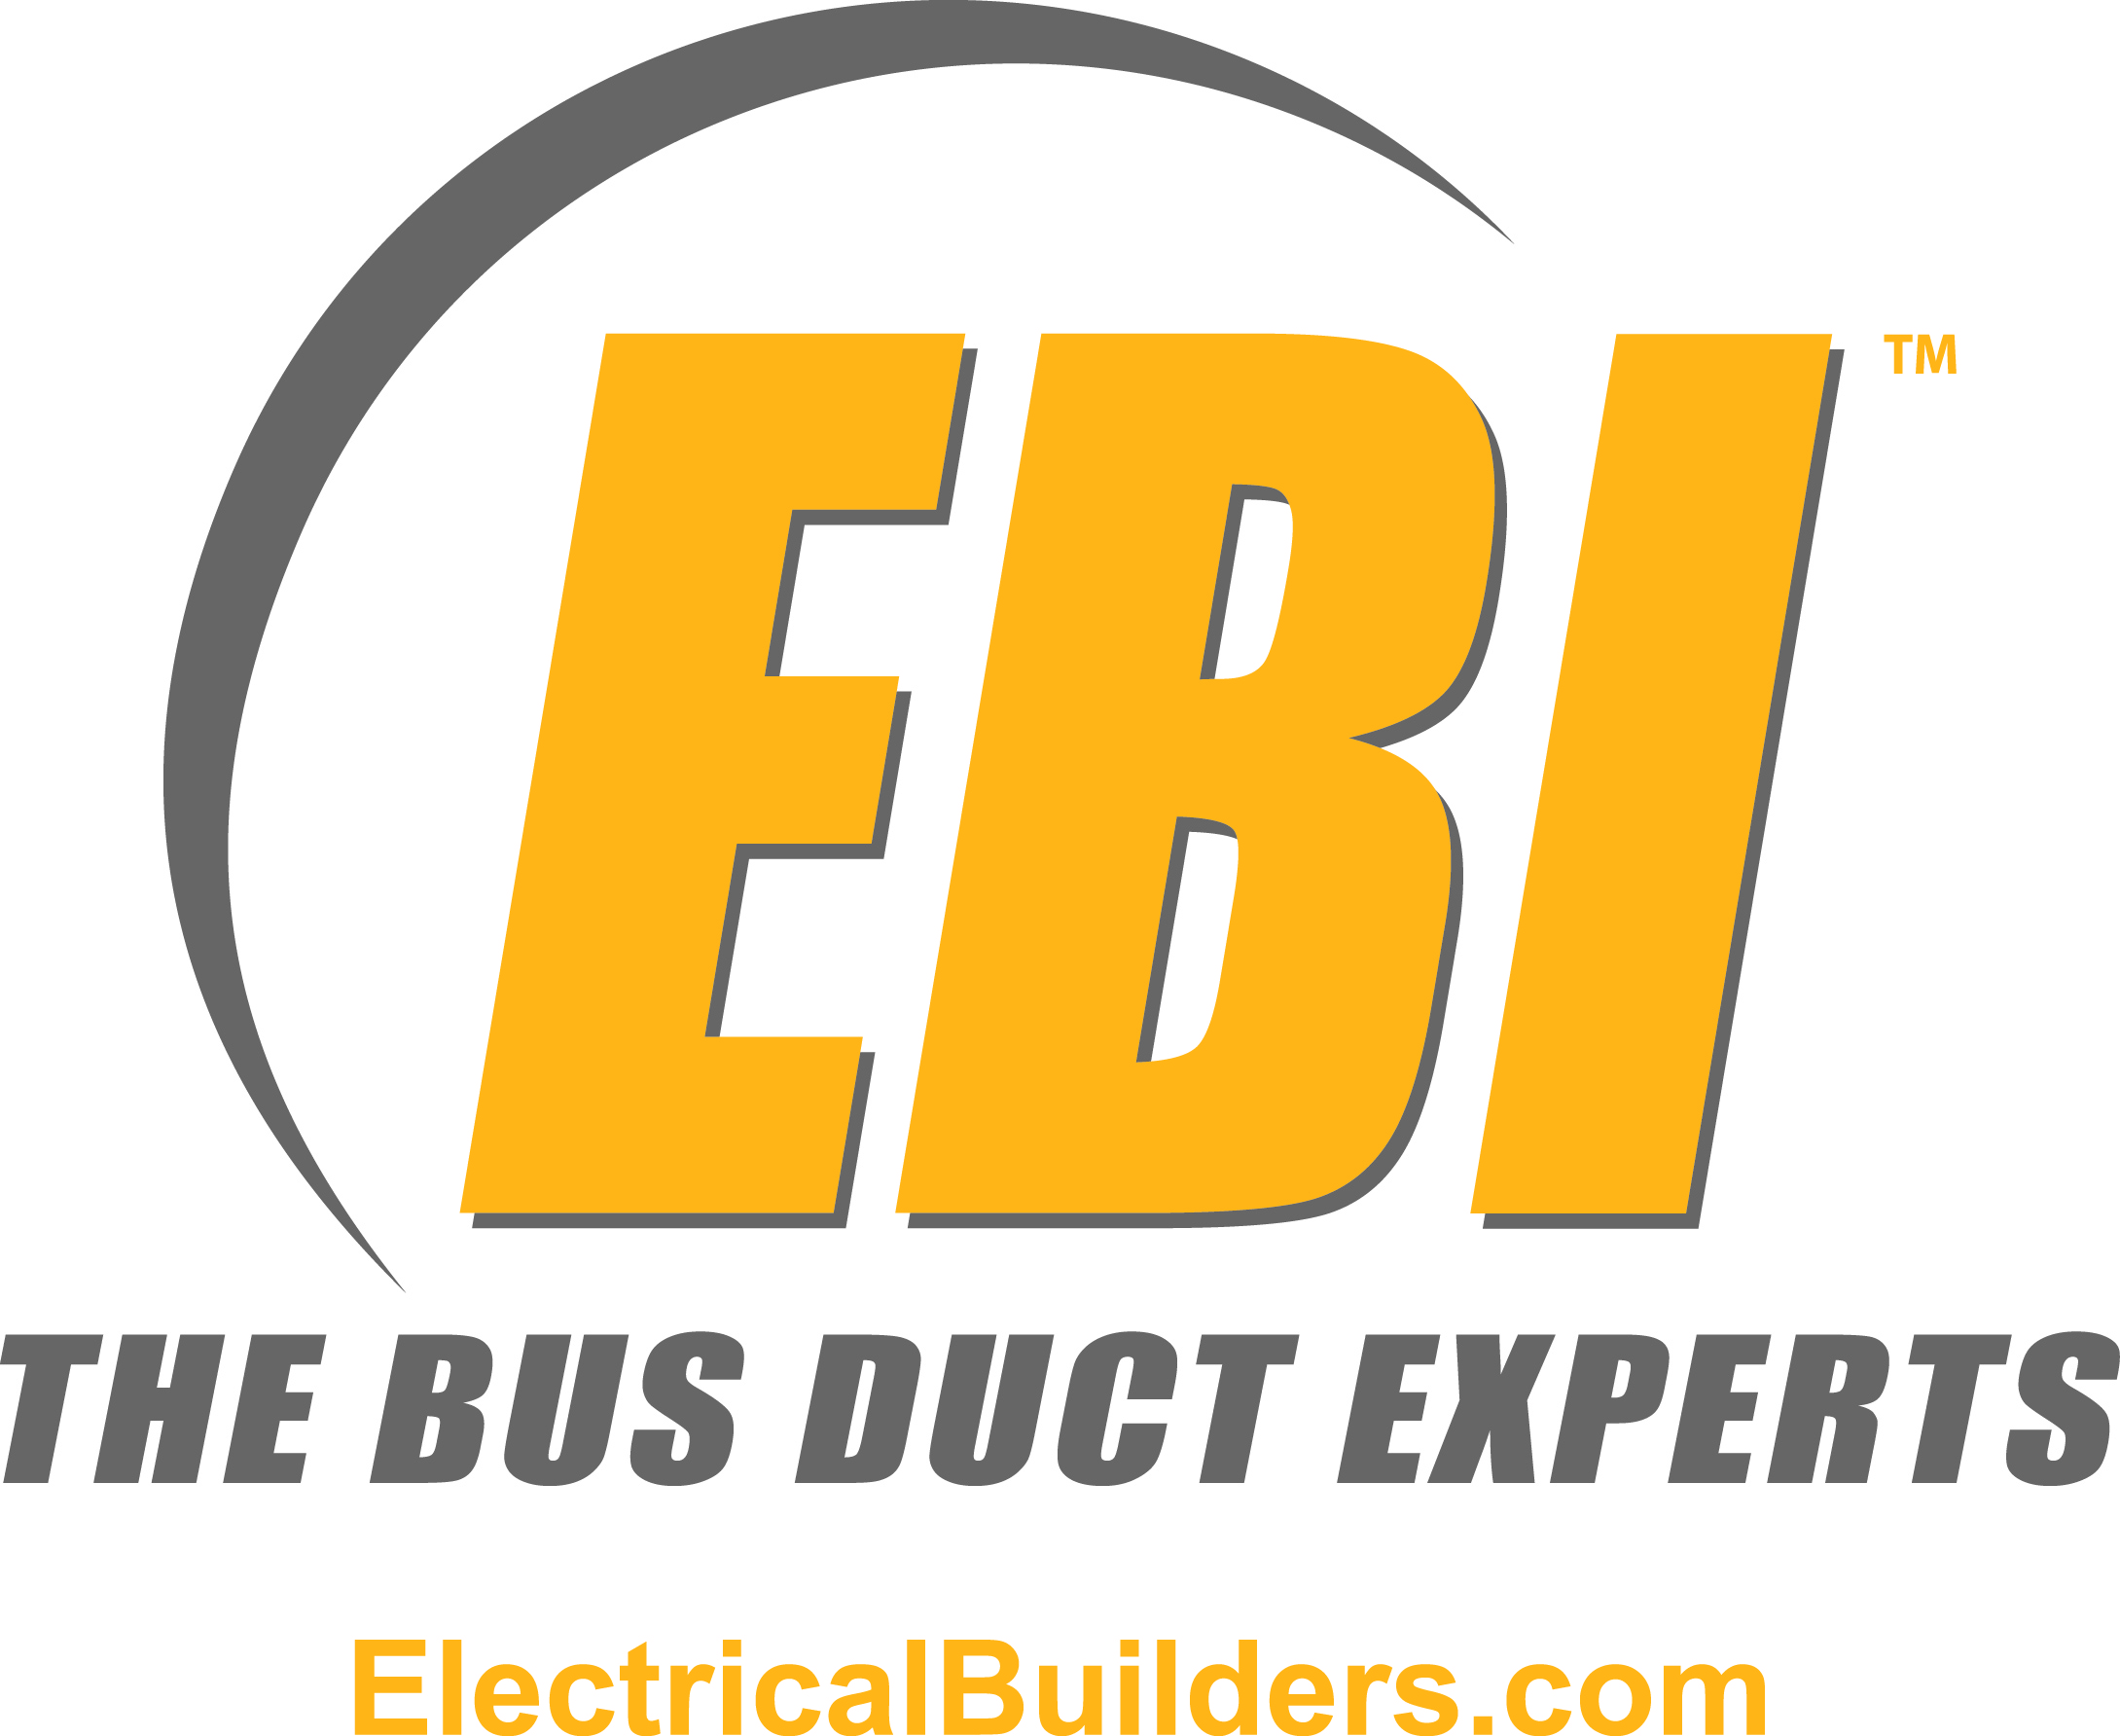 Electrical Builders, Inc. (EBI) at Electricity Forum